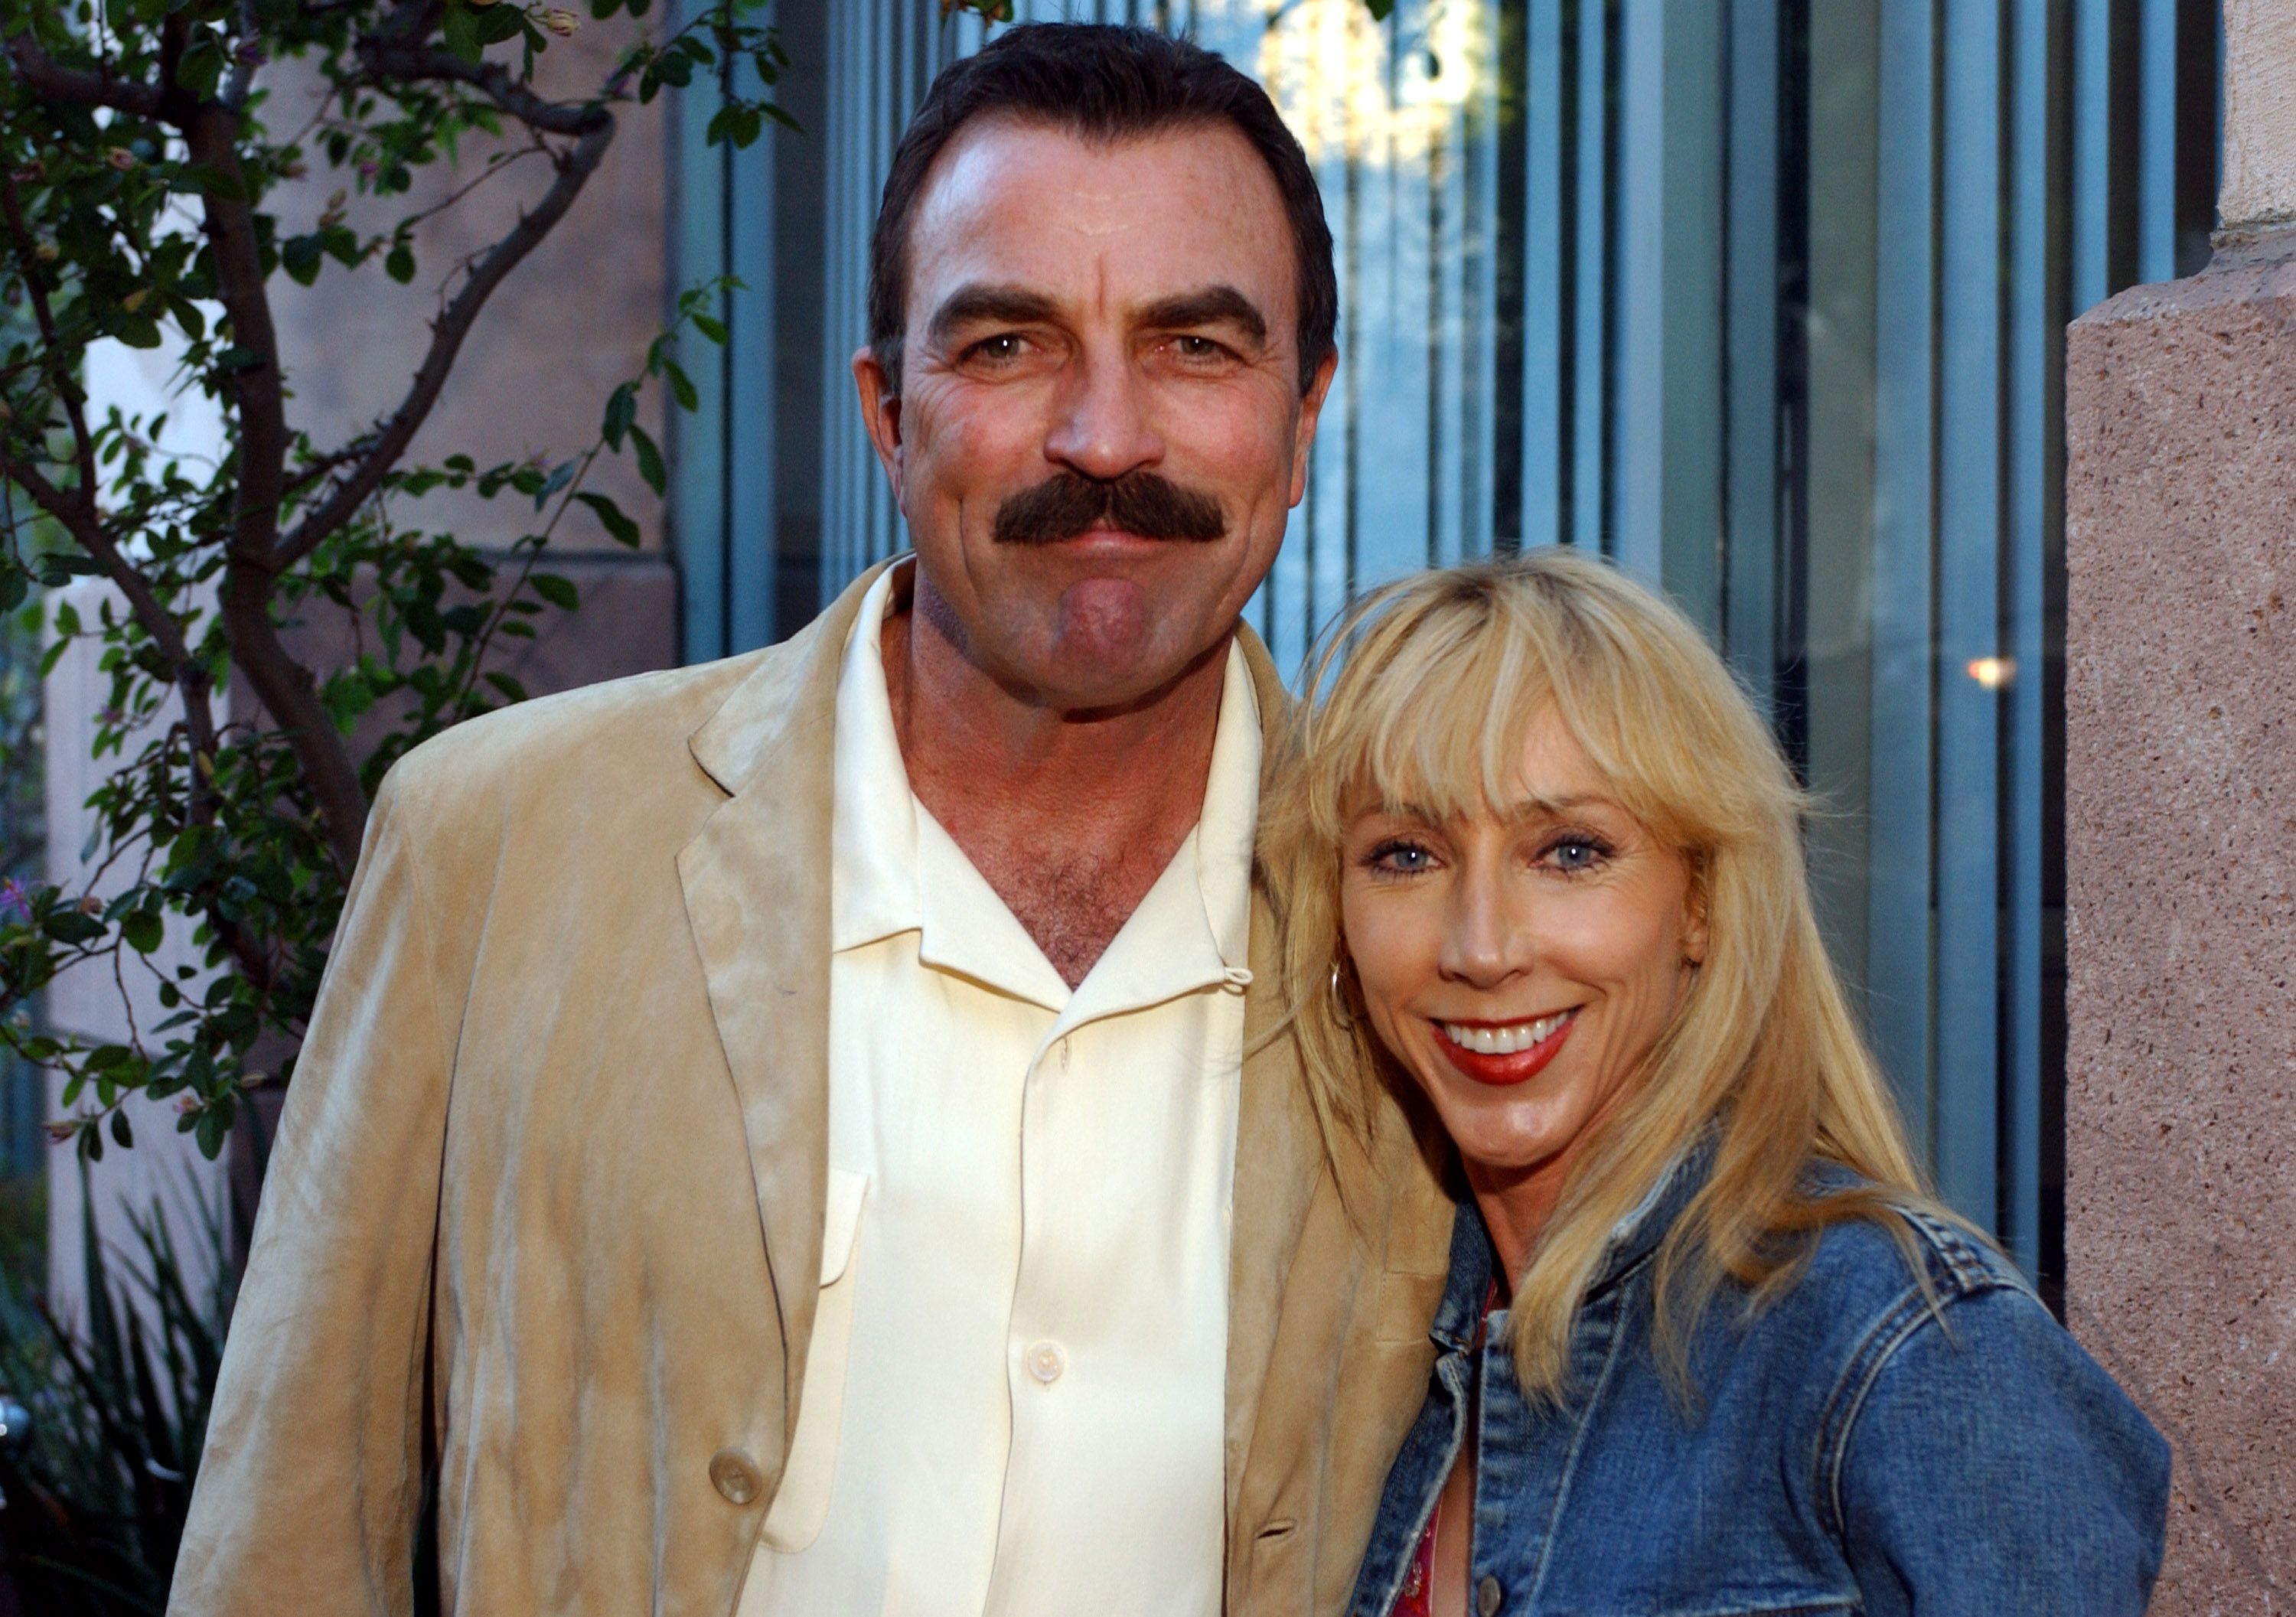 Tom Selleck and Jillie Mack attend the 8th Anniversary of the Grand Havana Room and the Premiere of James Orr's Documentaries on the Fuente Family - Arrivals at The Grand Havana Room in Beverly Hills, California, United States. | Source: Getty Images